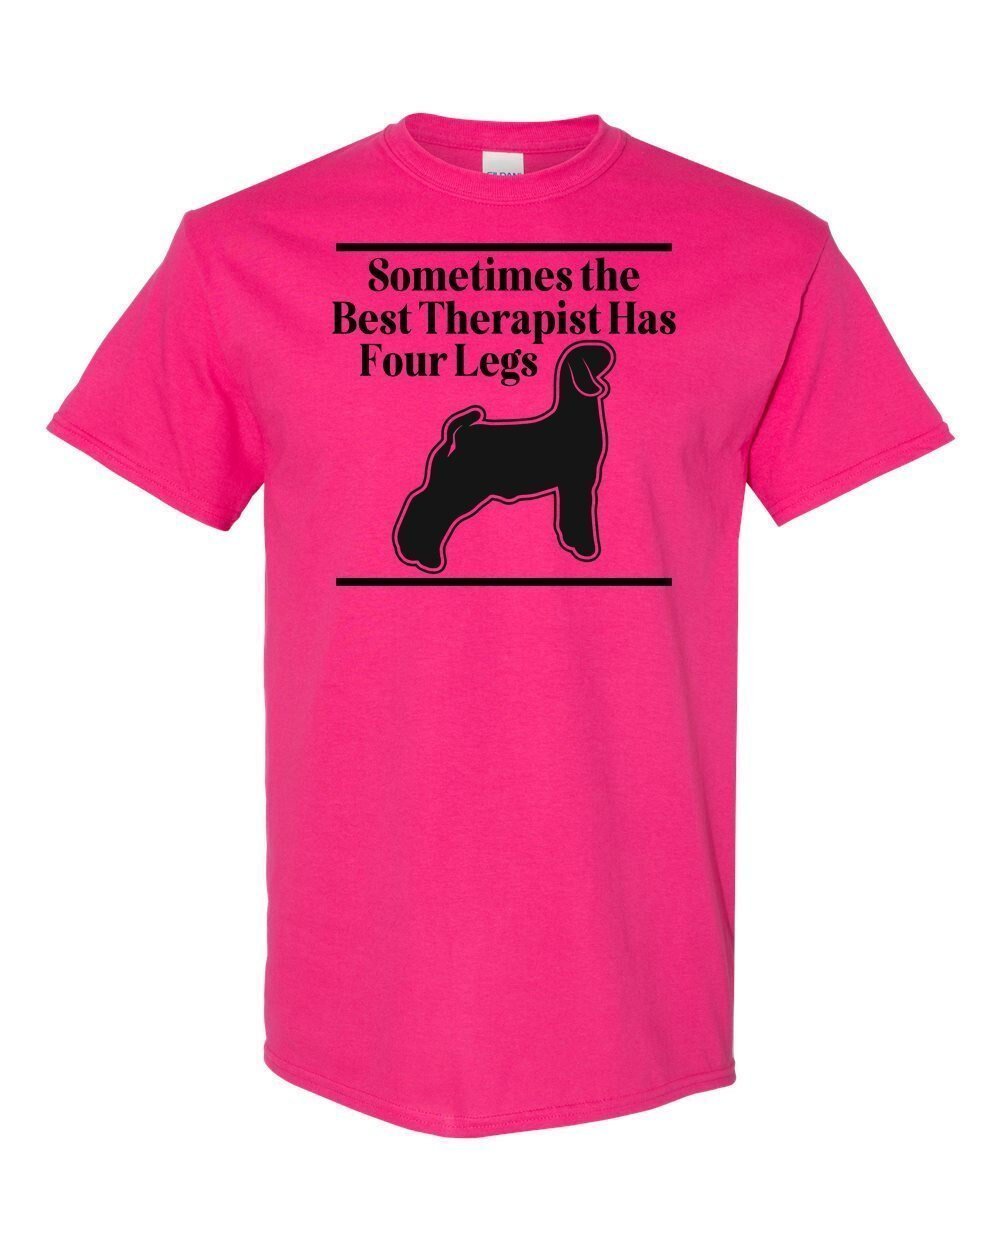 Sometimes the Best Therapist Has 4 Legs (Goat) Download - 1